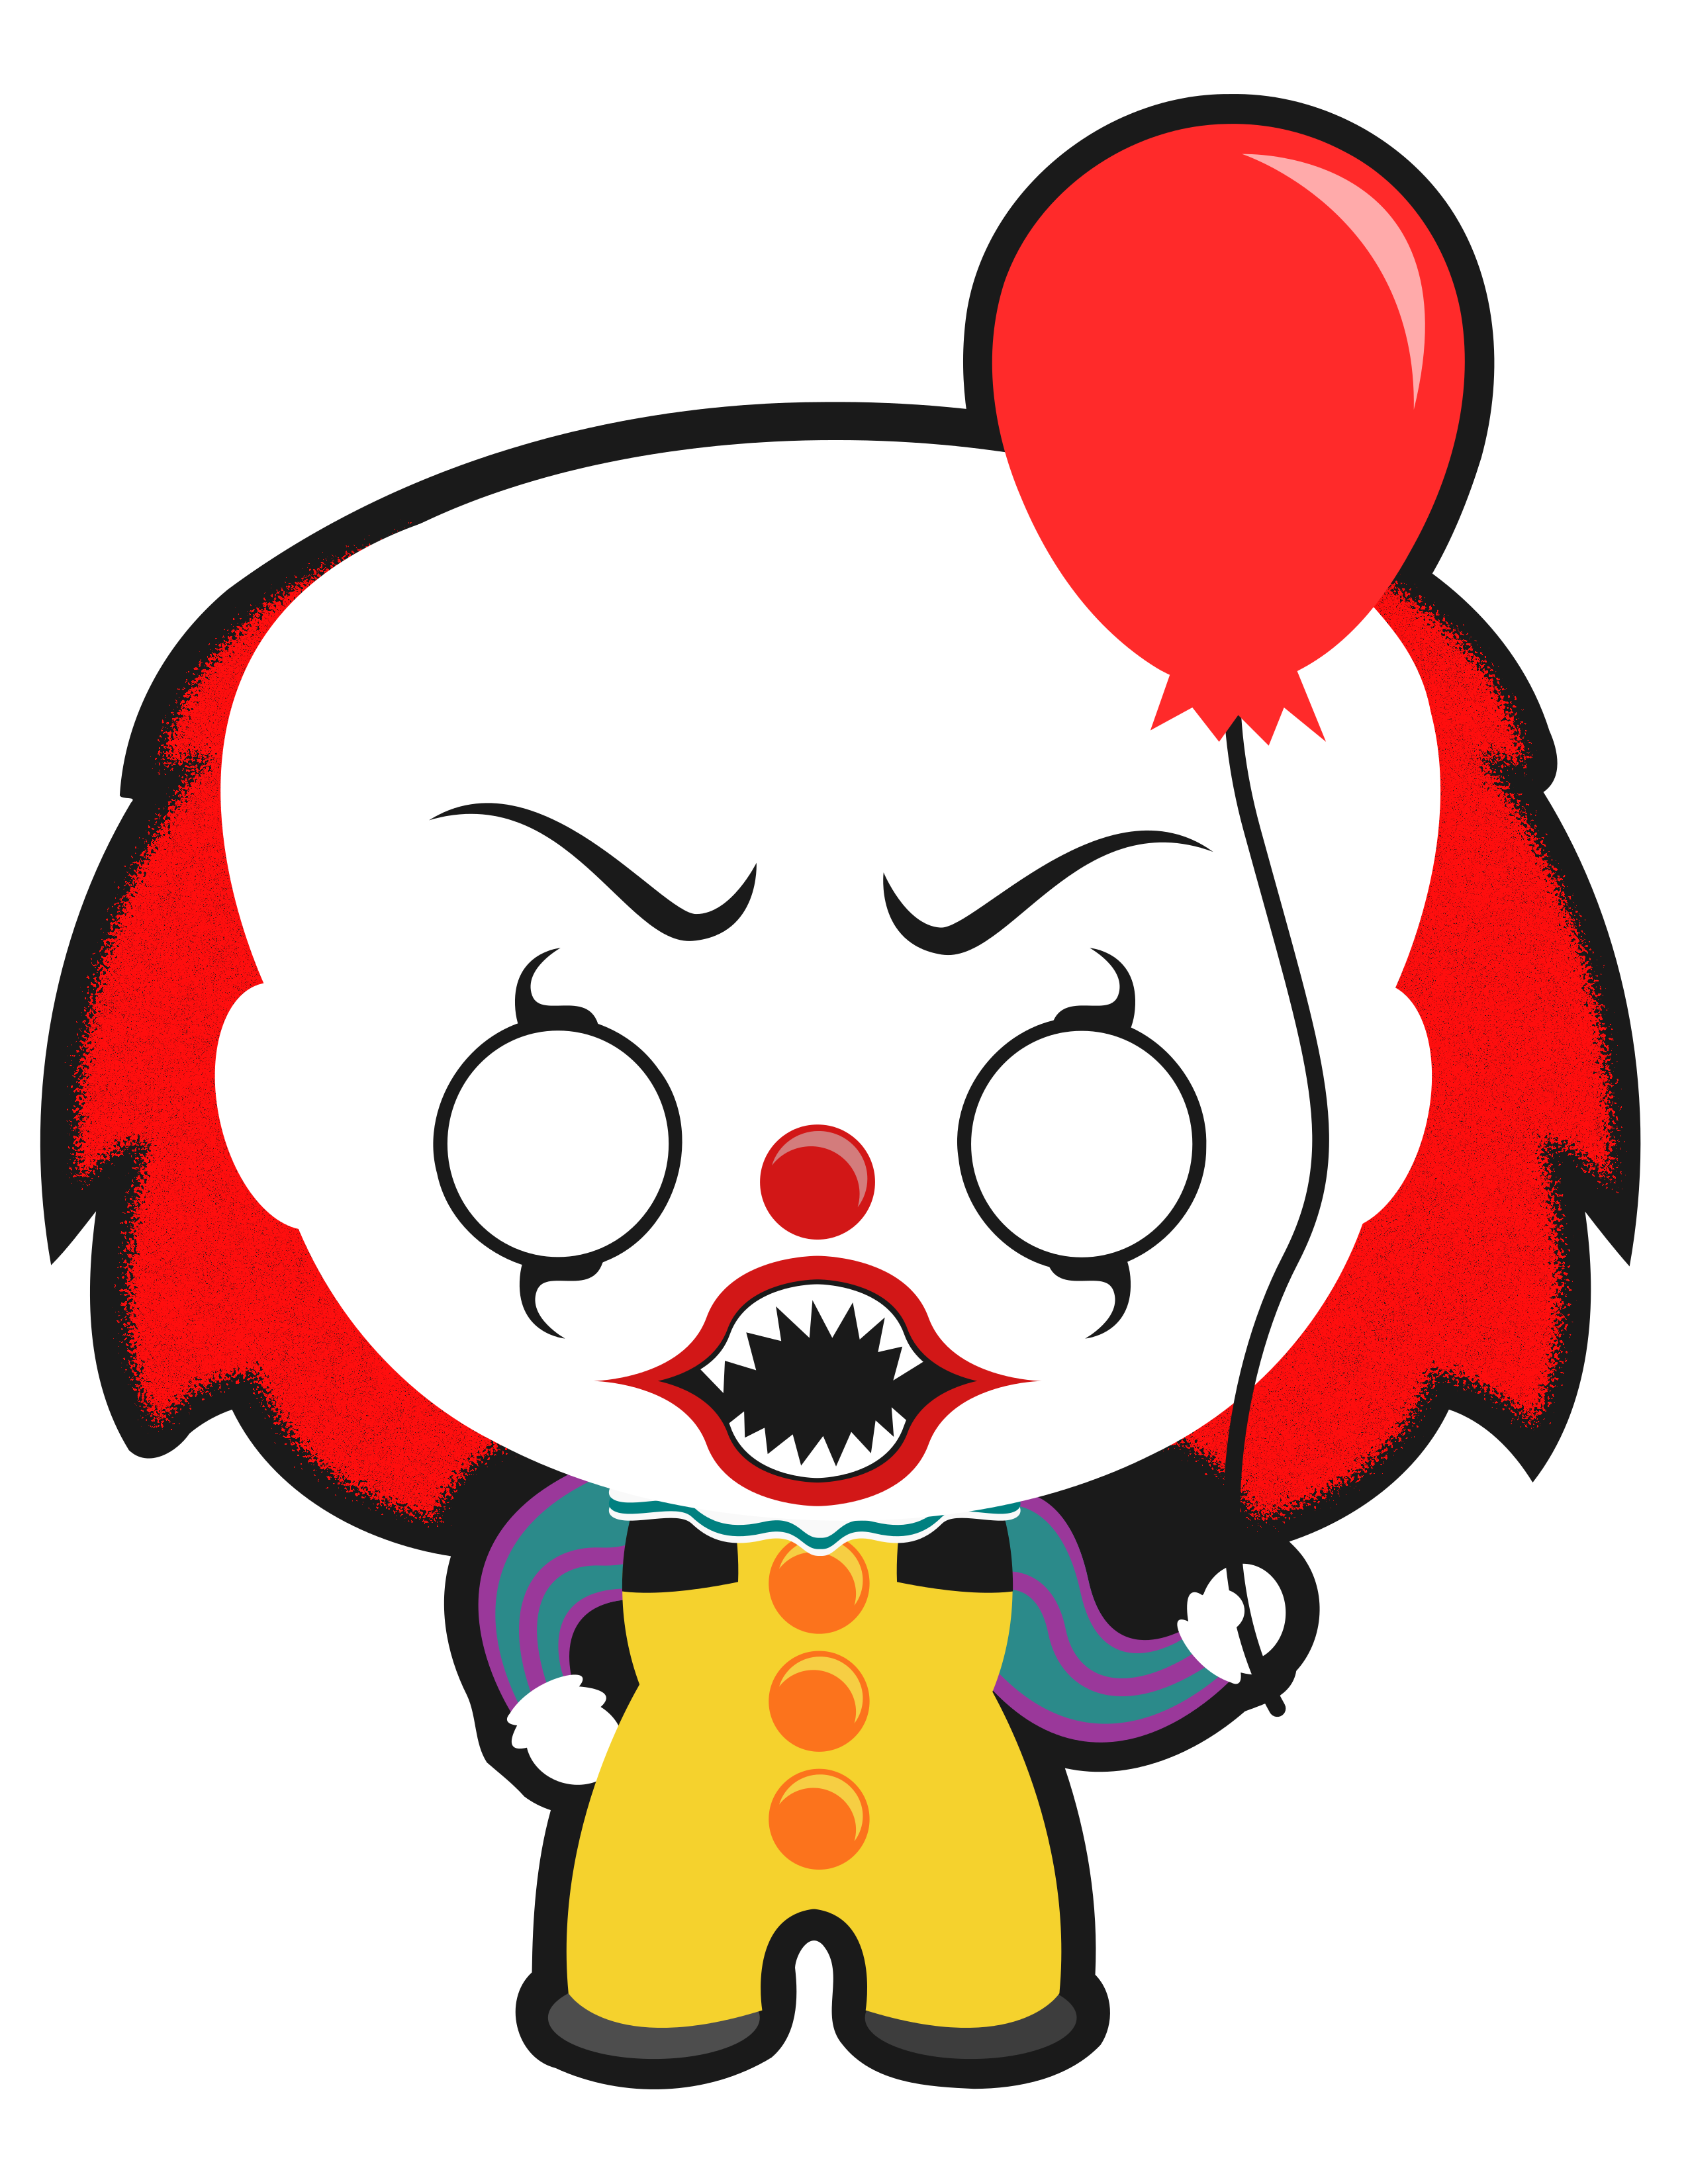 pennywise clipart character